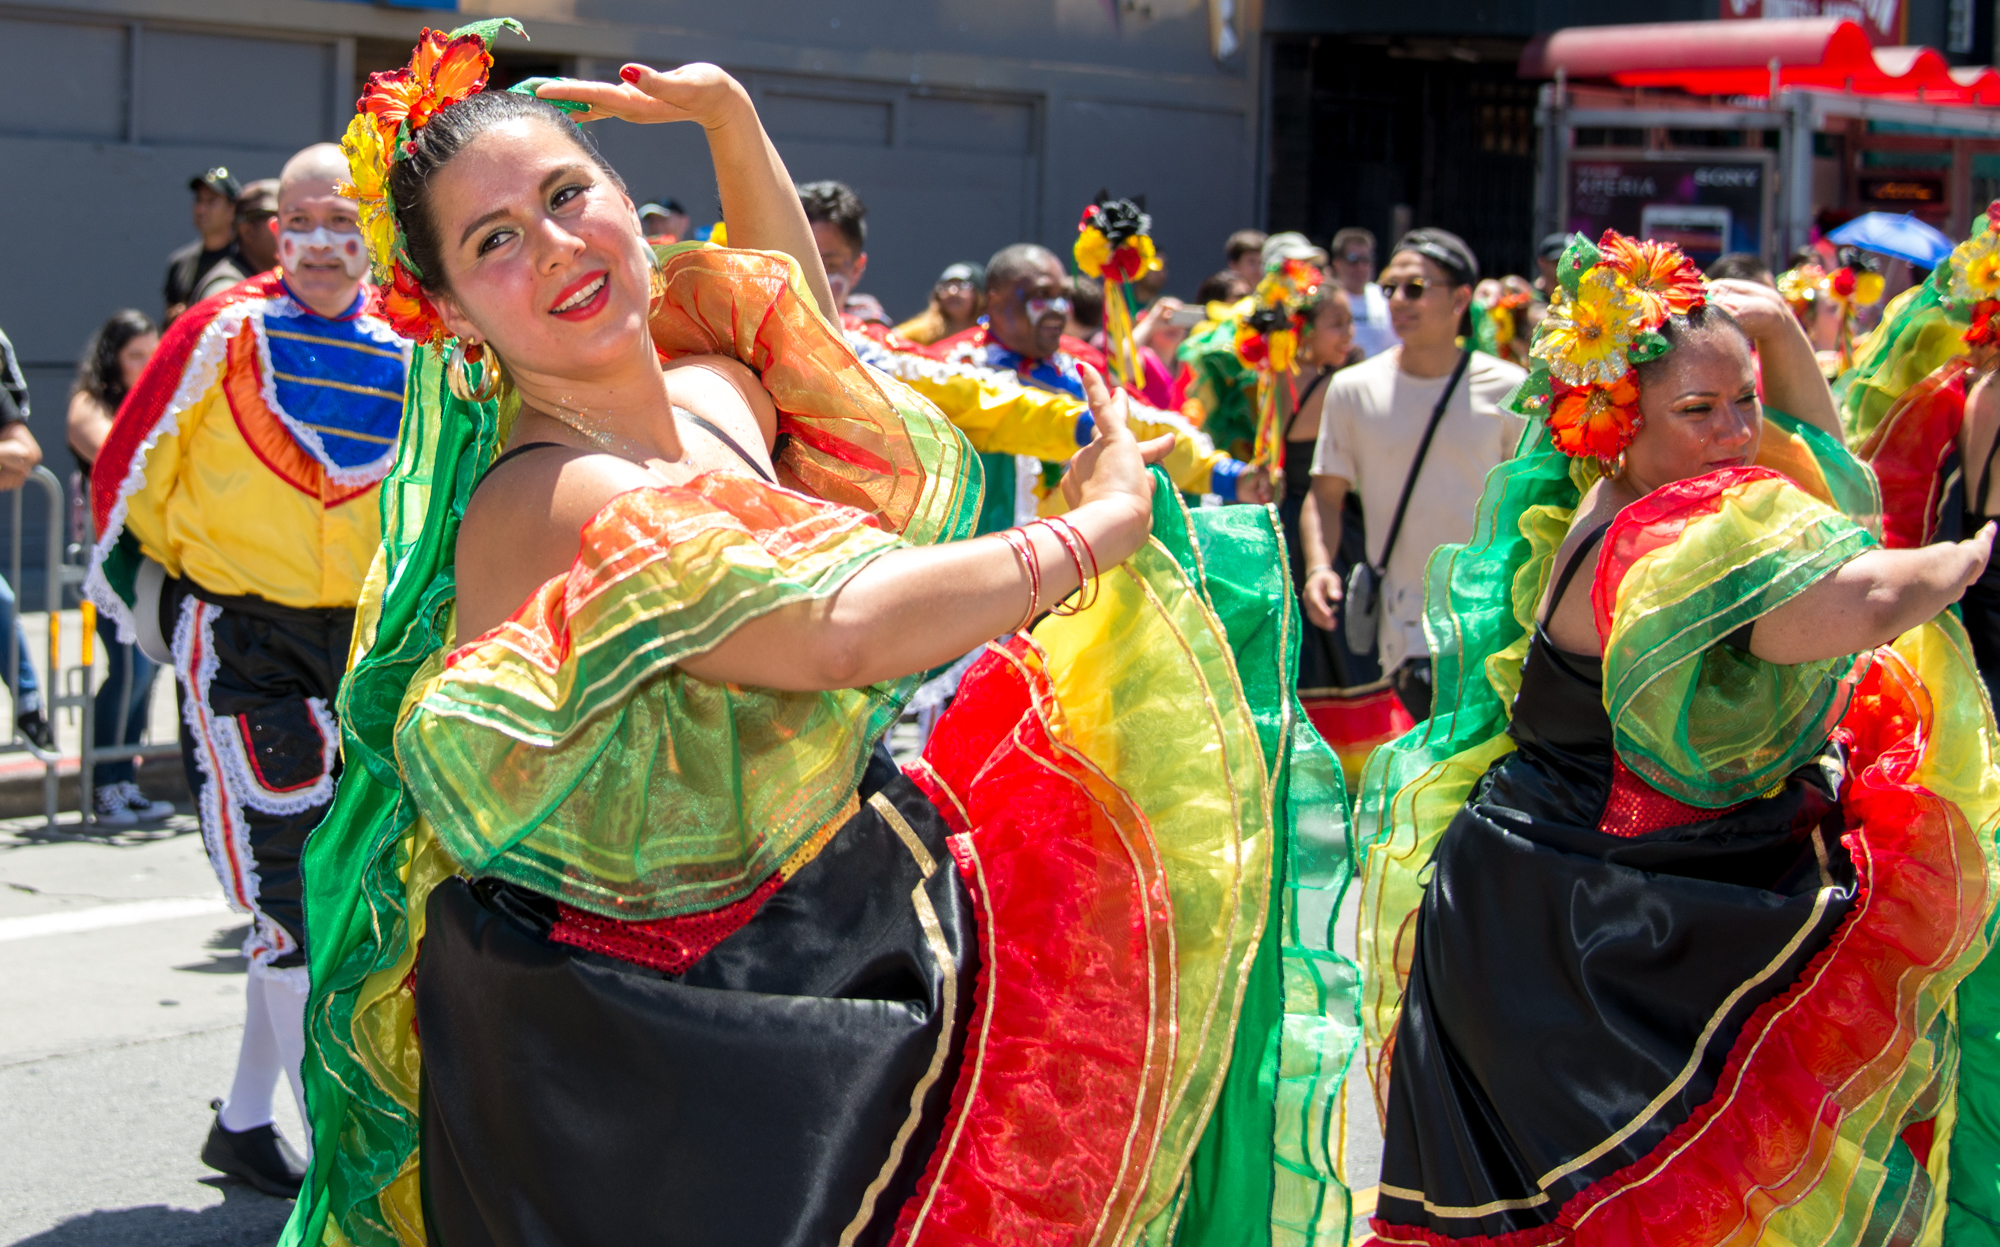 Dancers performing Columbian folkloric dance outside. They have one hand by their head with the other hand pushing outward across the chest while smiling.